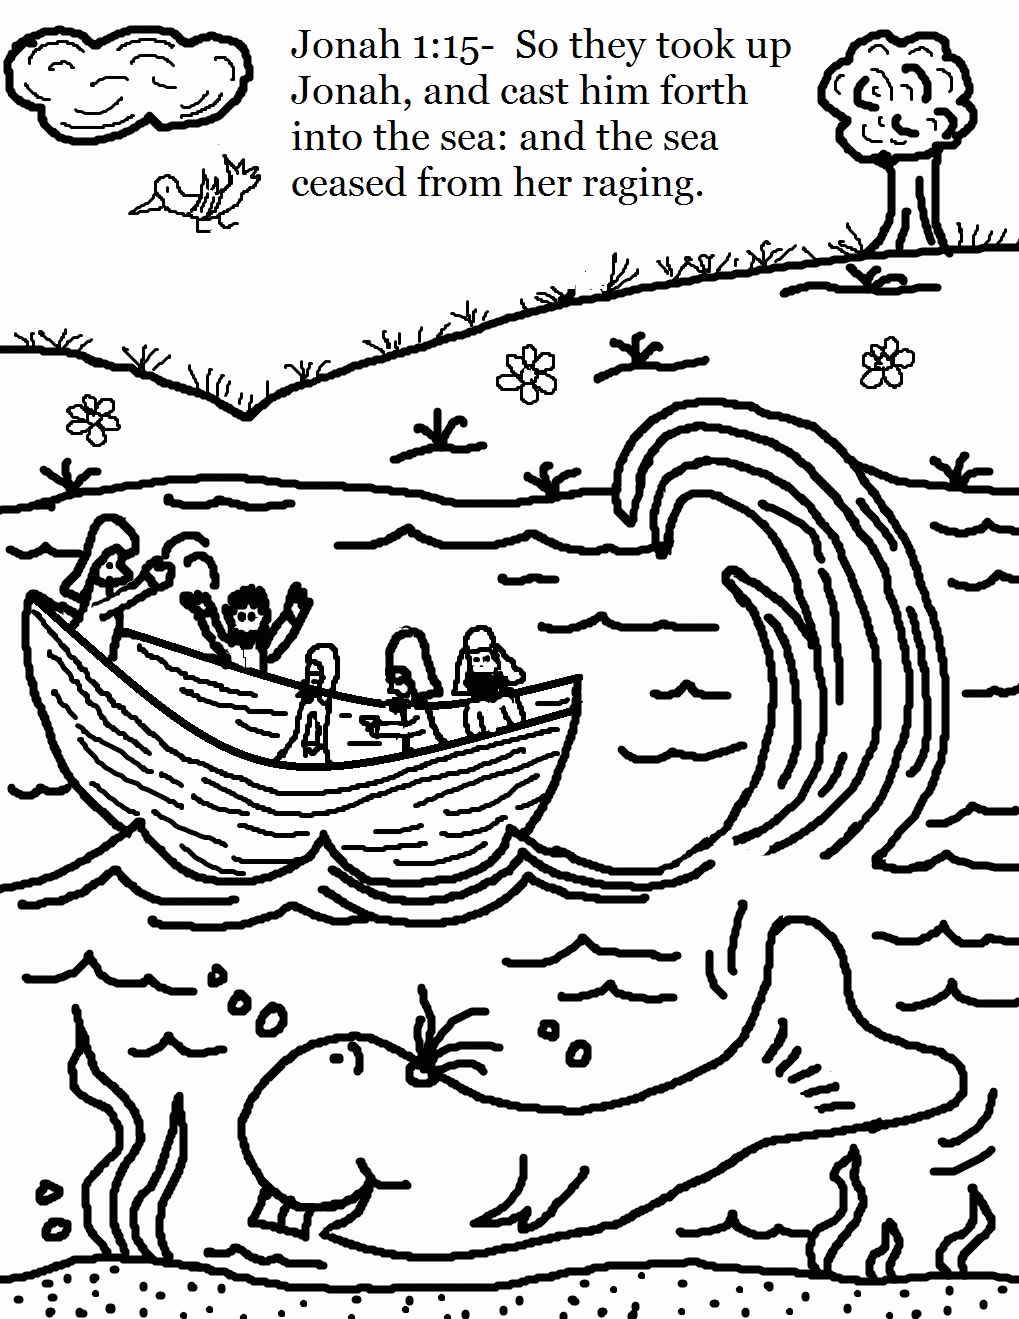 Jonah And The Whale Coloring Pages | Forcoloringpages.com